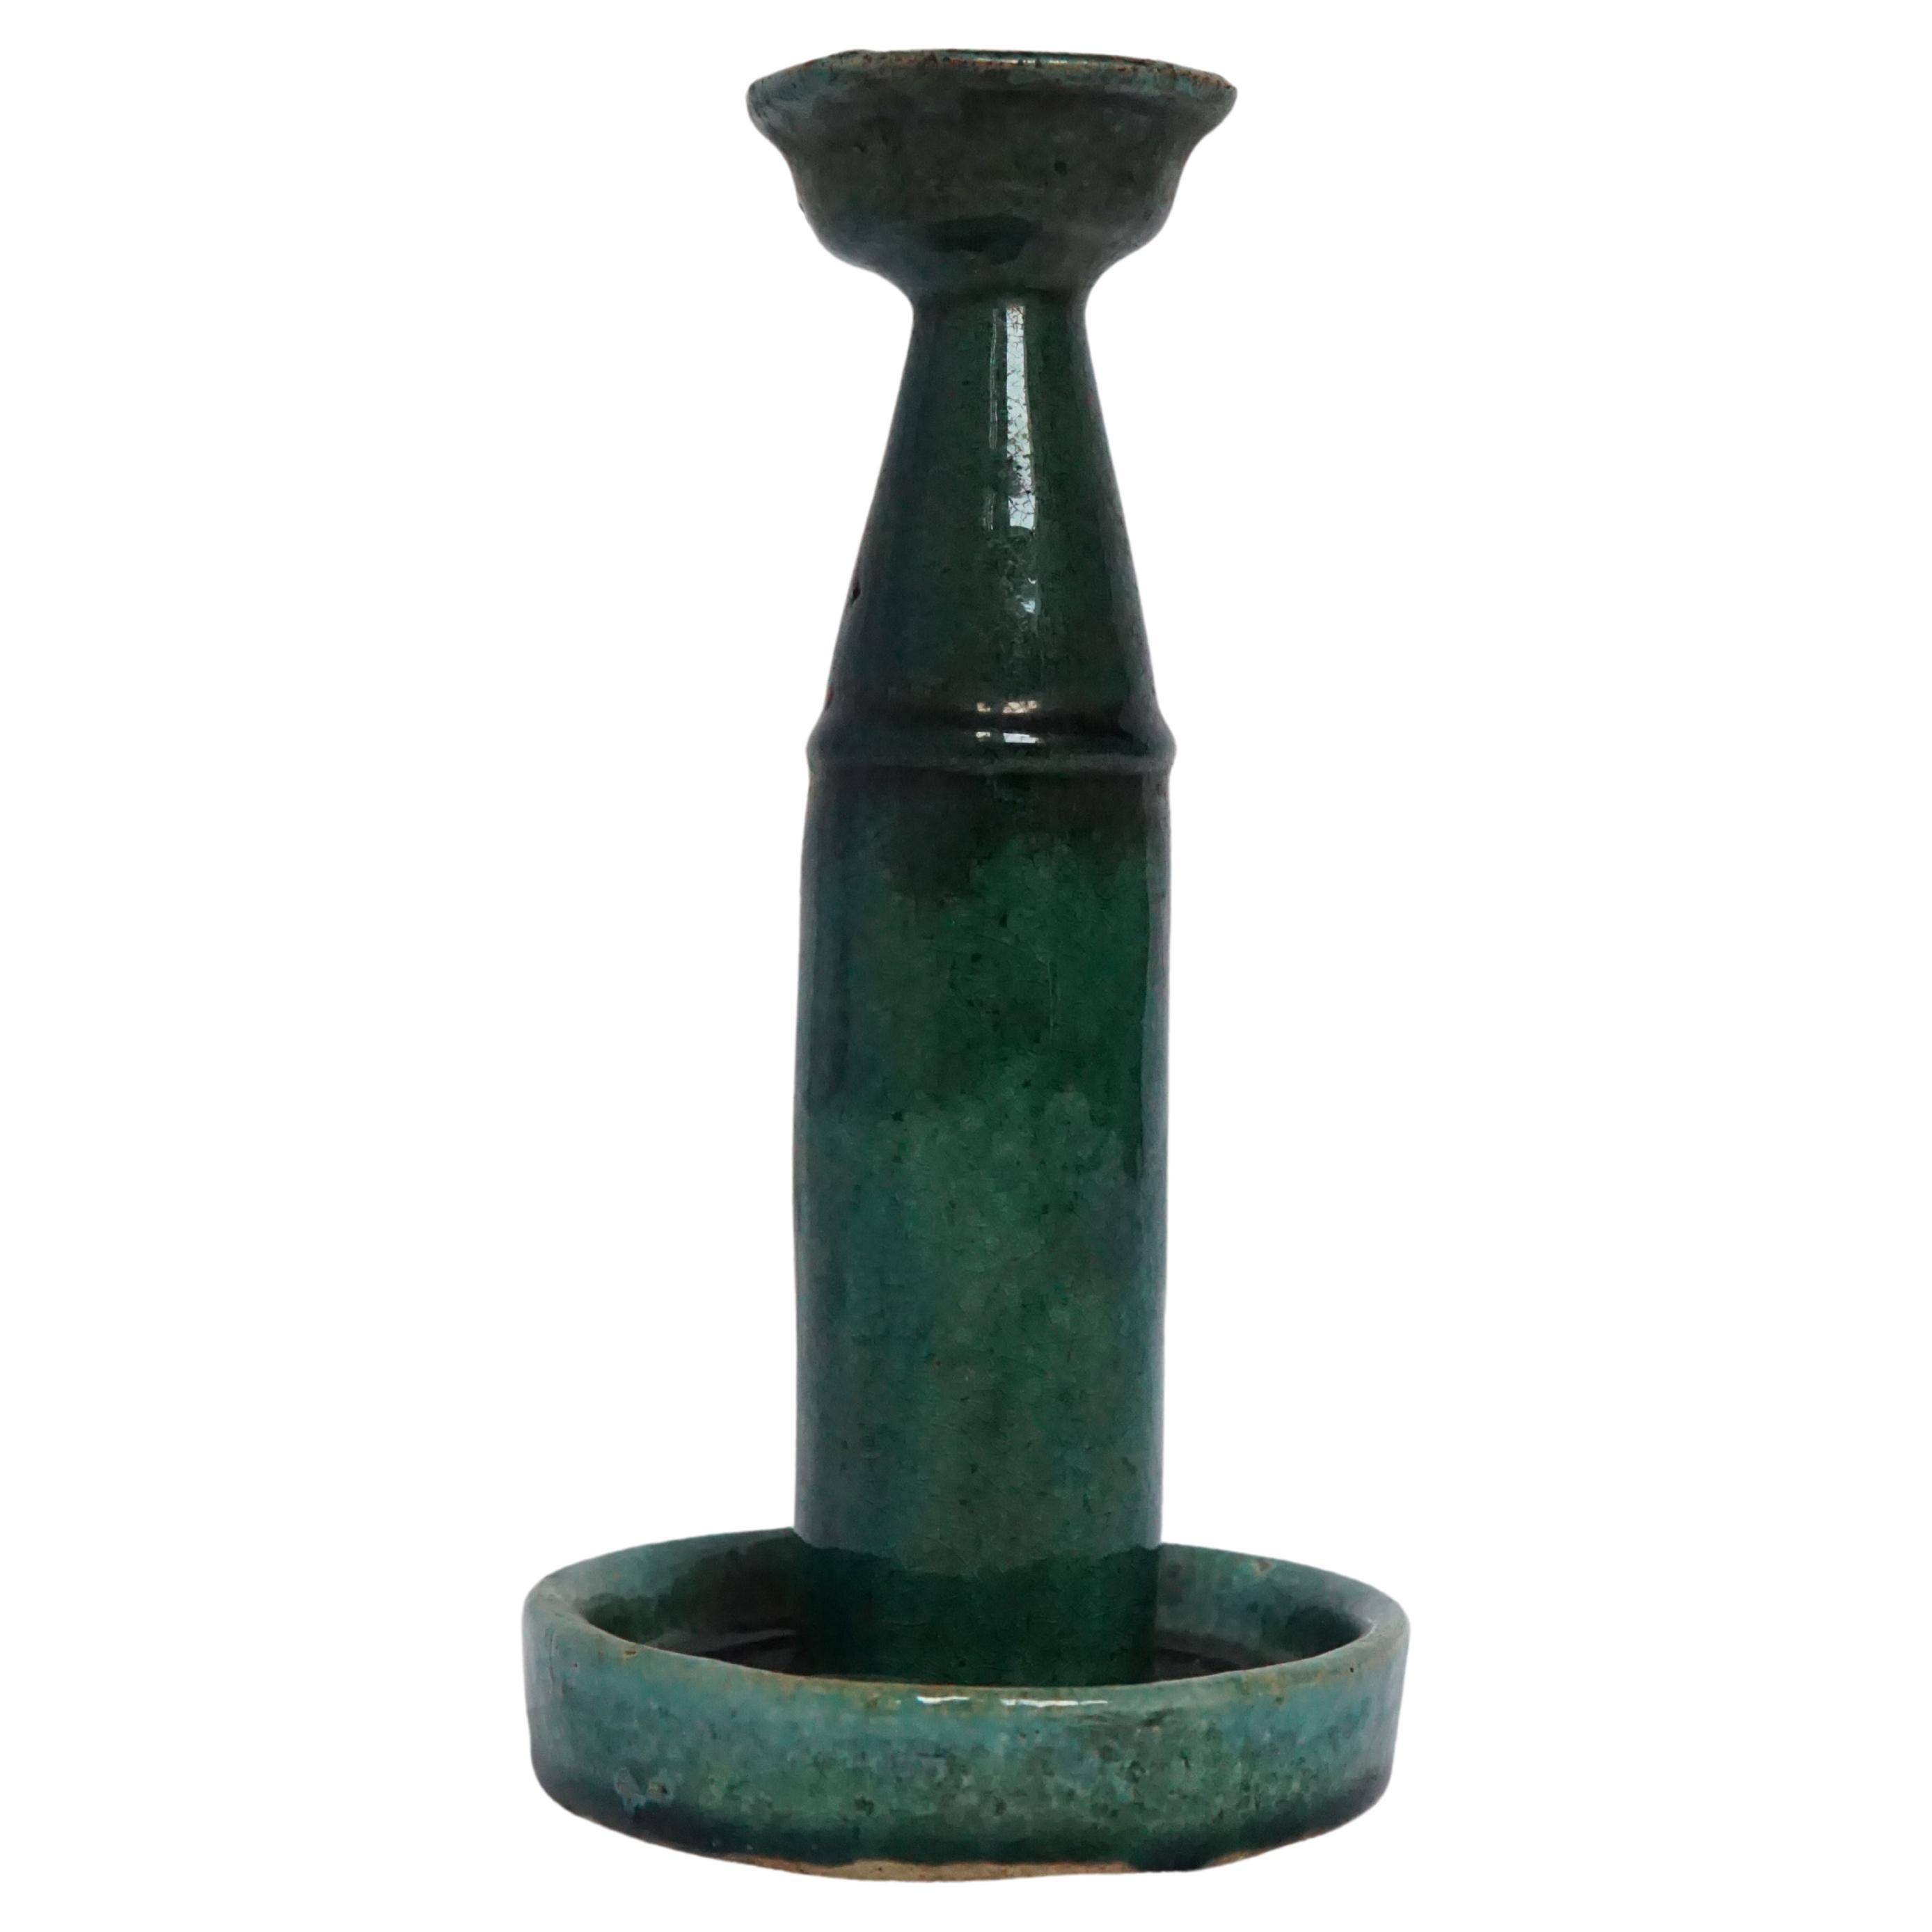 Chinese Ceramic 'Shiwan' Oil Lamp / Candle Holder, Green Glaze, c. 1950